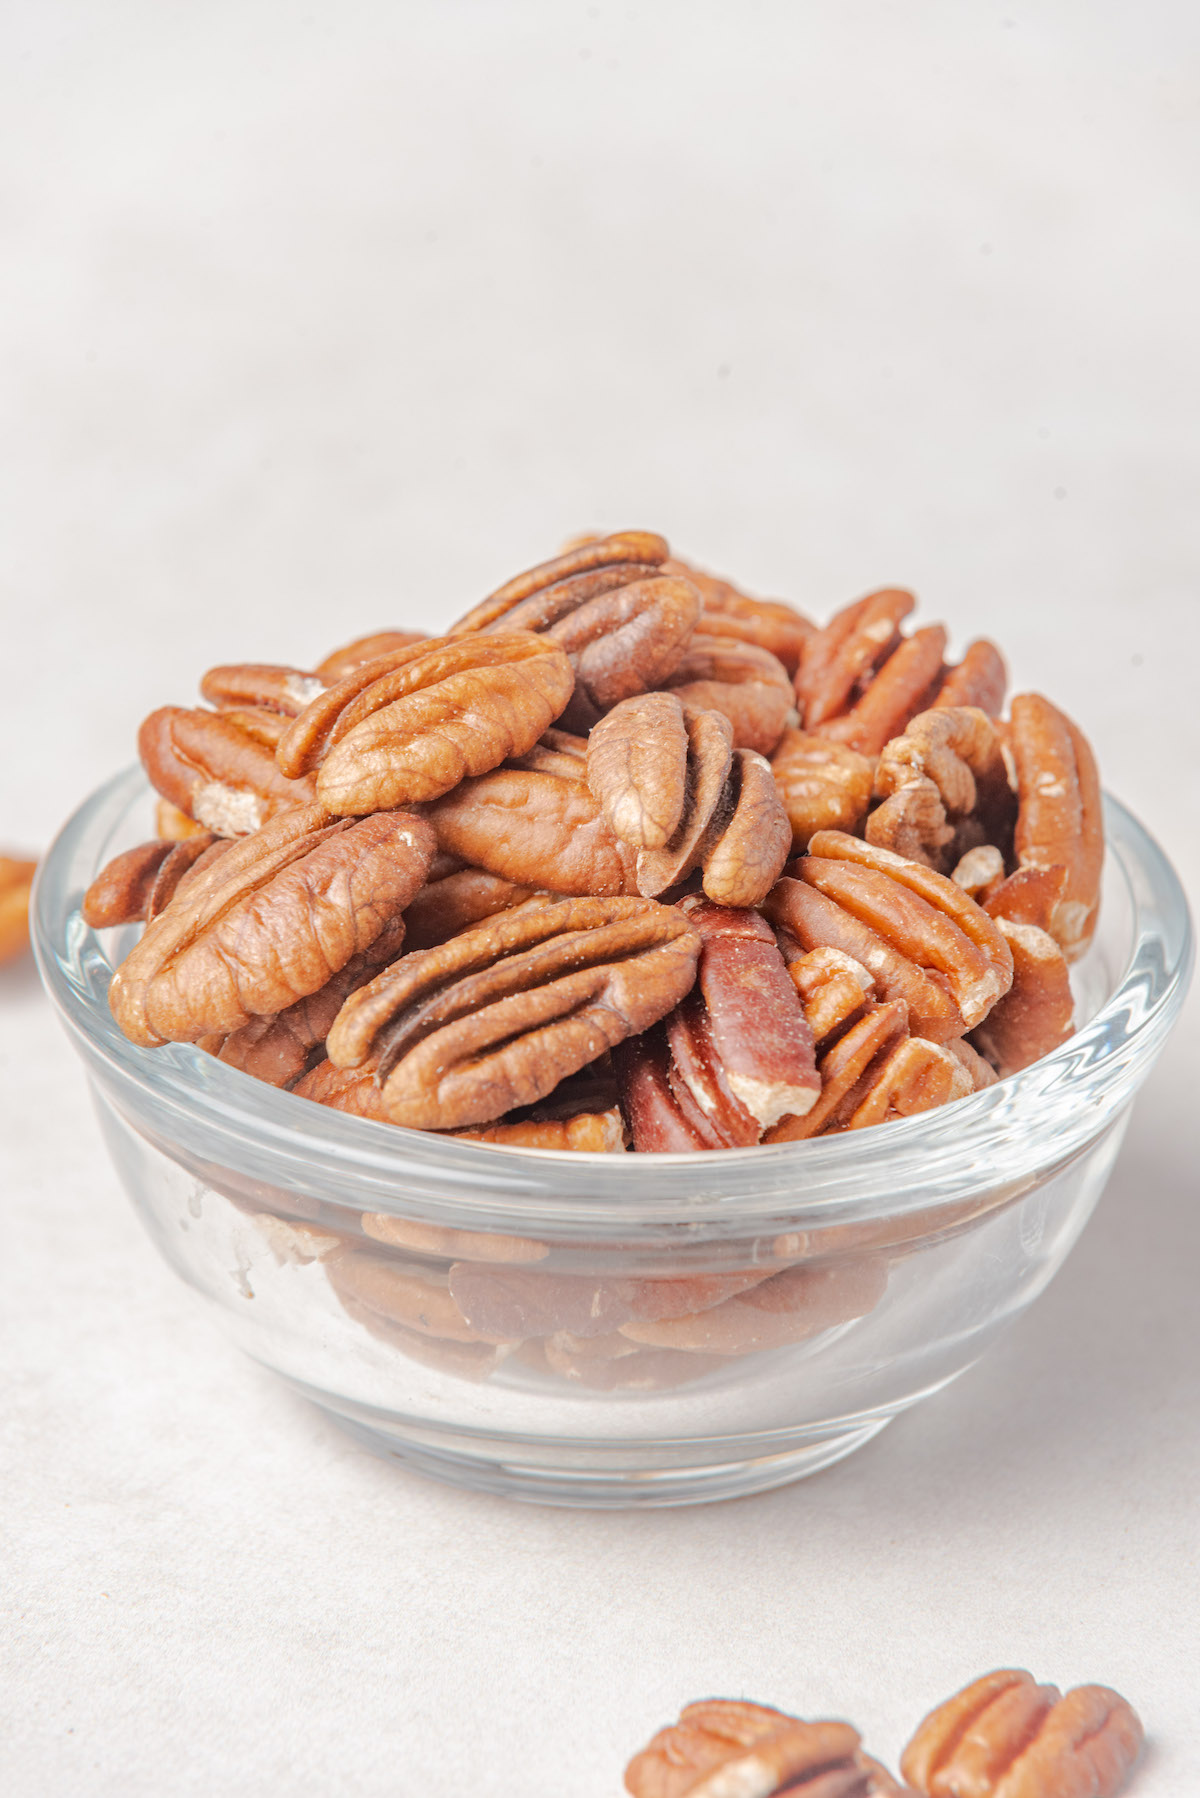 a glass bowl filled with pecan halves